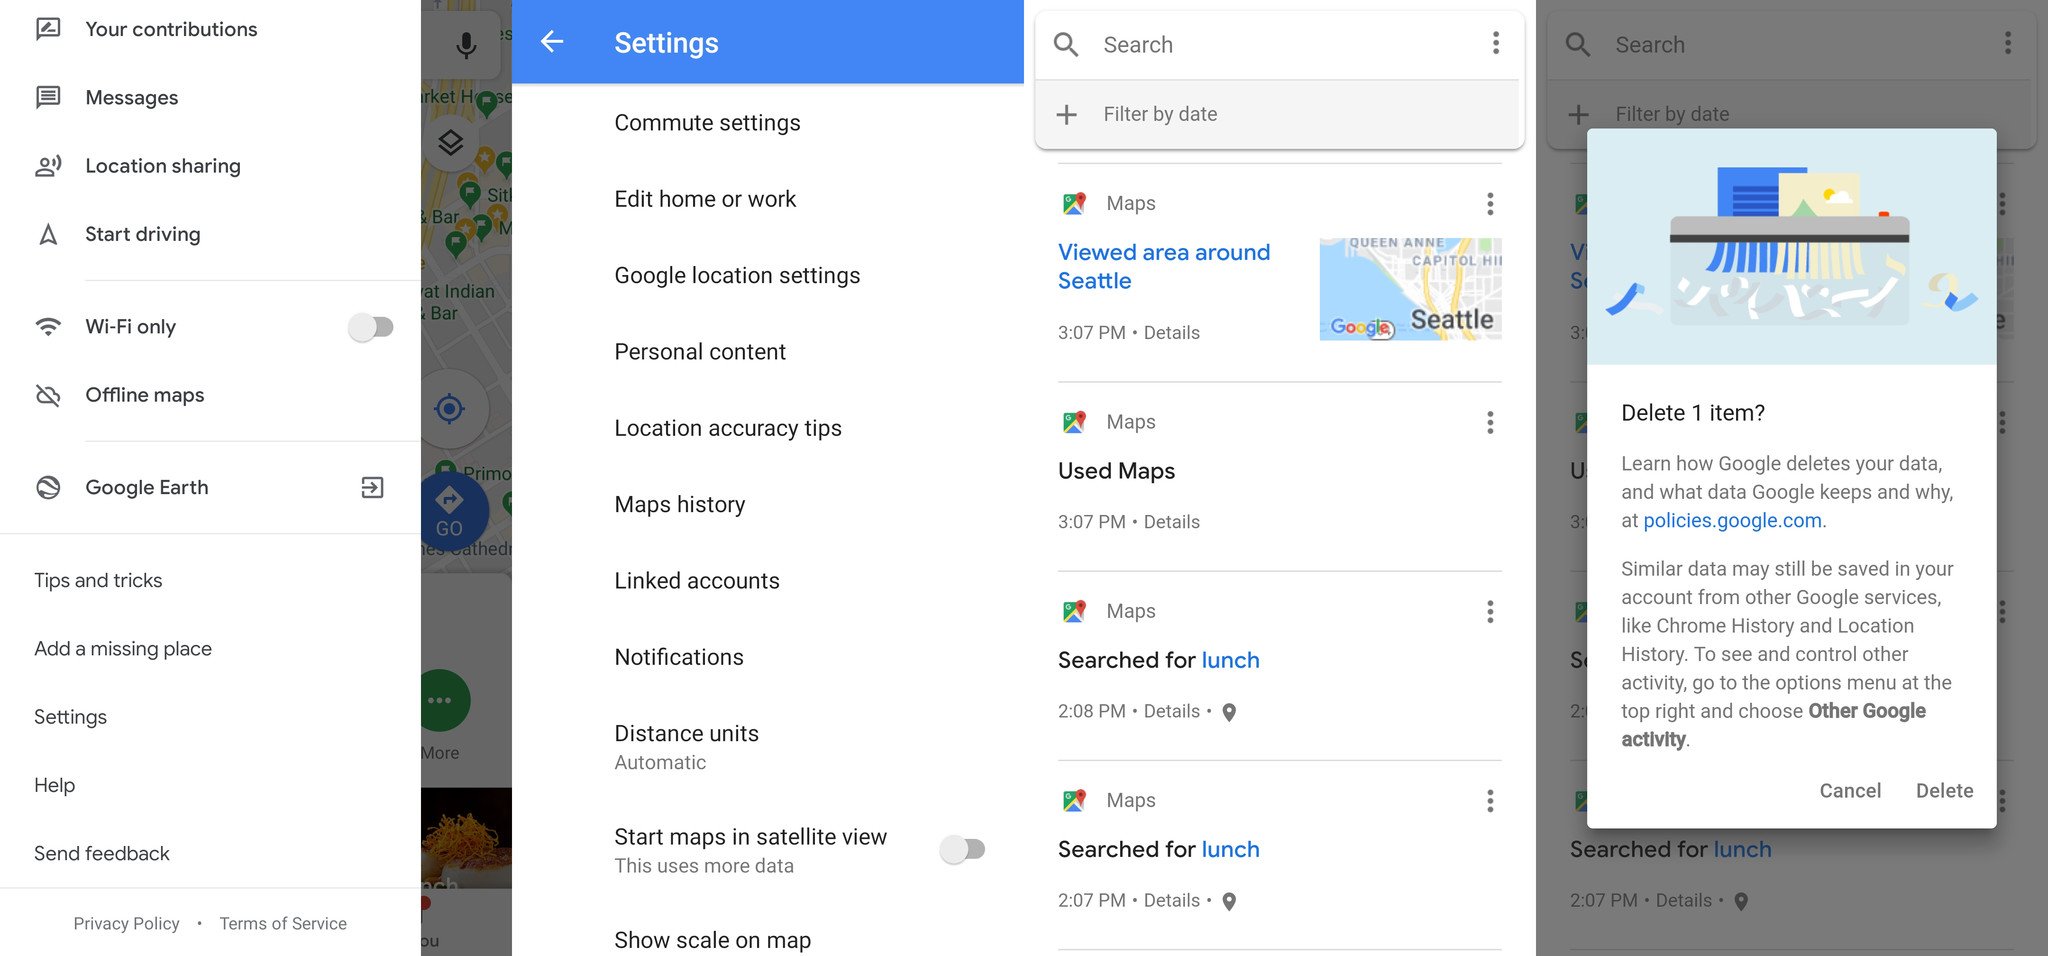 How to delete items from your Google Maps history-How to Use Google Maps Like a Pro - Make the Most of Google Maps
